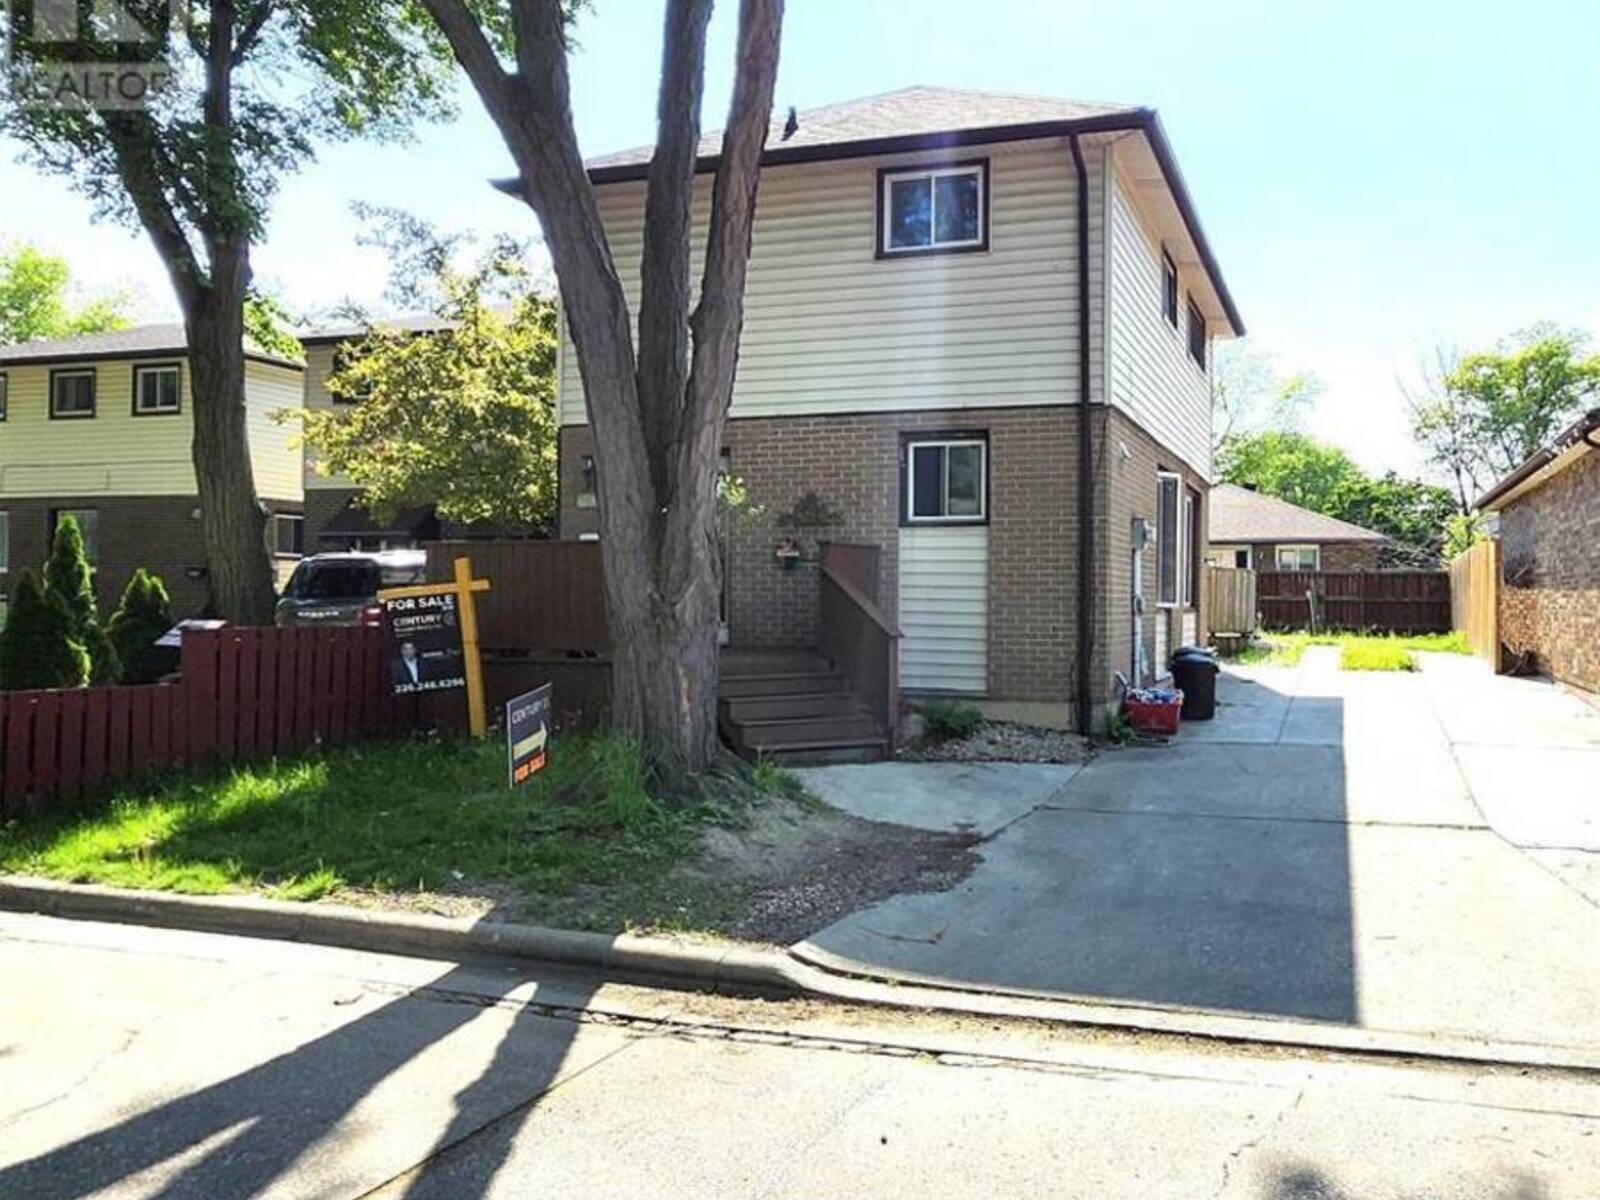 1273 COTTAGE PLACE, Windsor, Ontario N8S 4H4